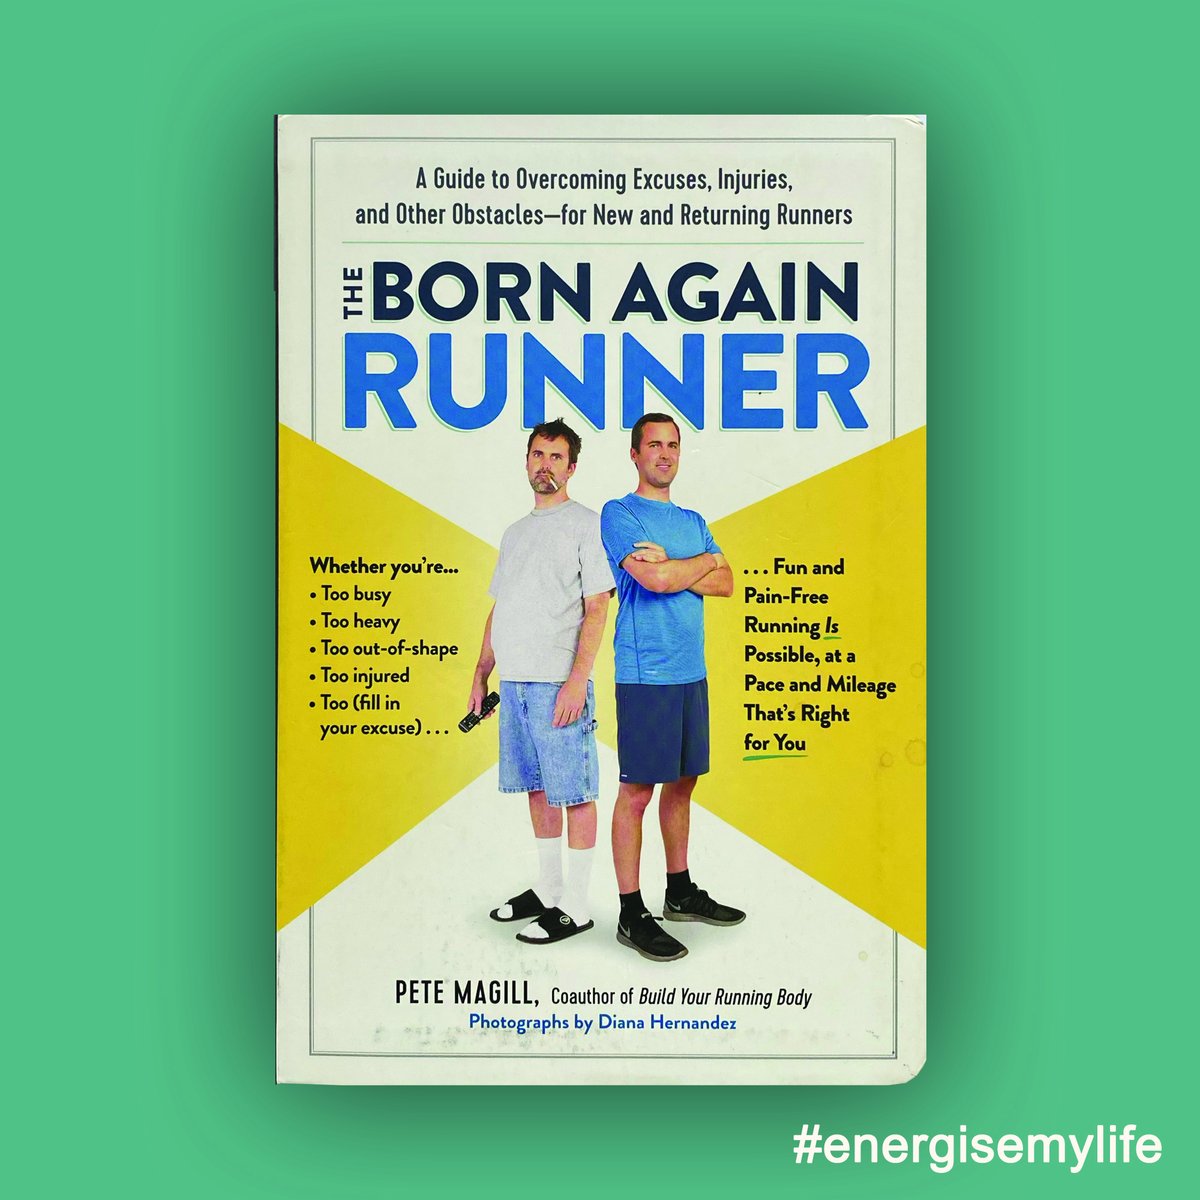 Books that changed me: Pete Magill, The Born Again Runner. This book got me out the door after a long break & years of no consistency. It changed my expectataion & my thoughts about running #booksthatchangedme #runmotivation #runspiration #runningbook #energisemylife